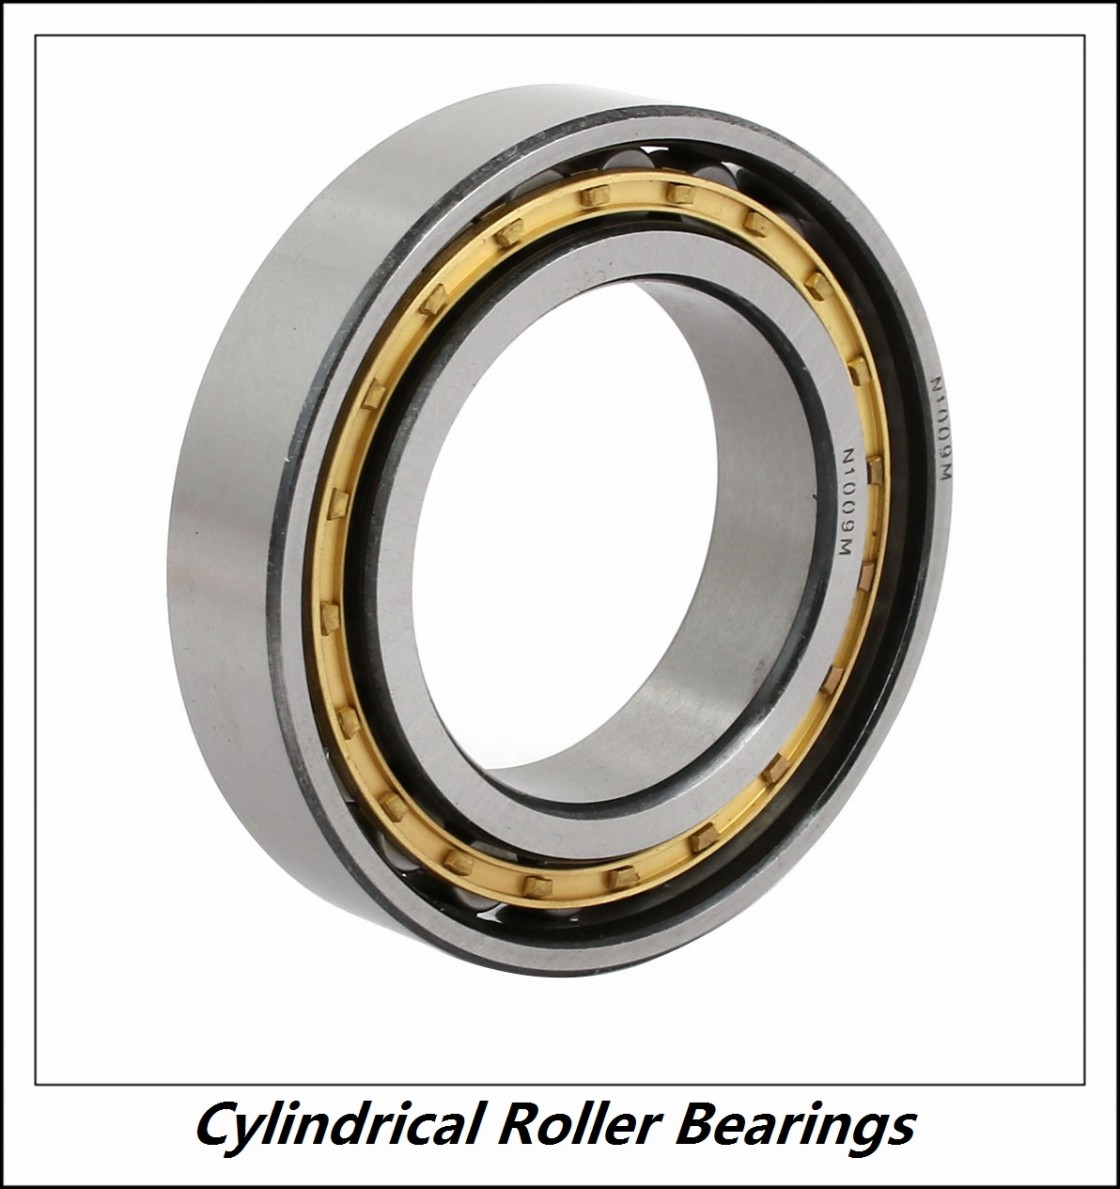 1.181 Inch | 30 Millimeter x 2.835 Inch | 72 Millimeter x 0.748 Inch | 19 Millimeter  CONSOLIDATED BEARING NU-306E  Cylindrical Roller Bearings